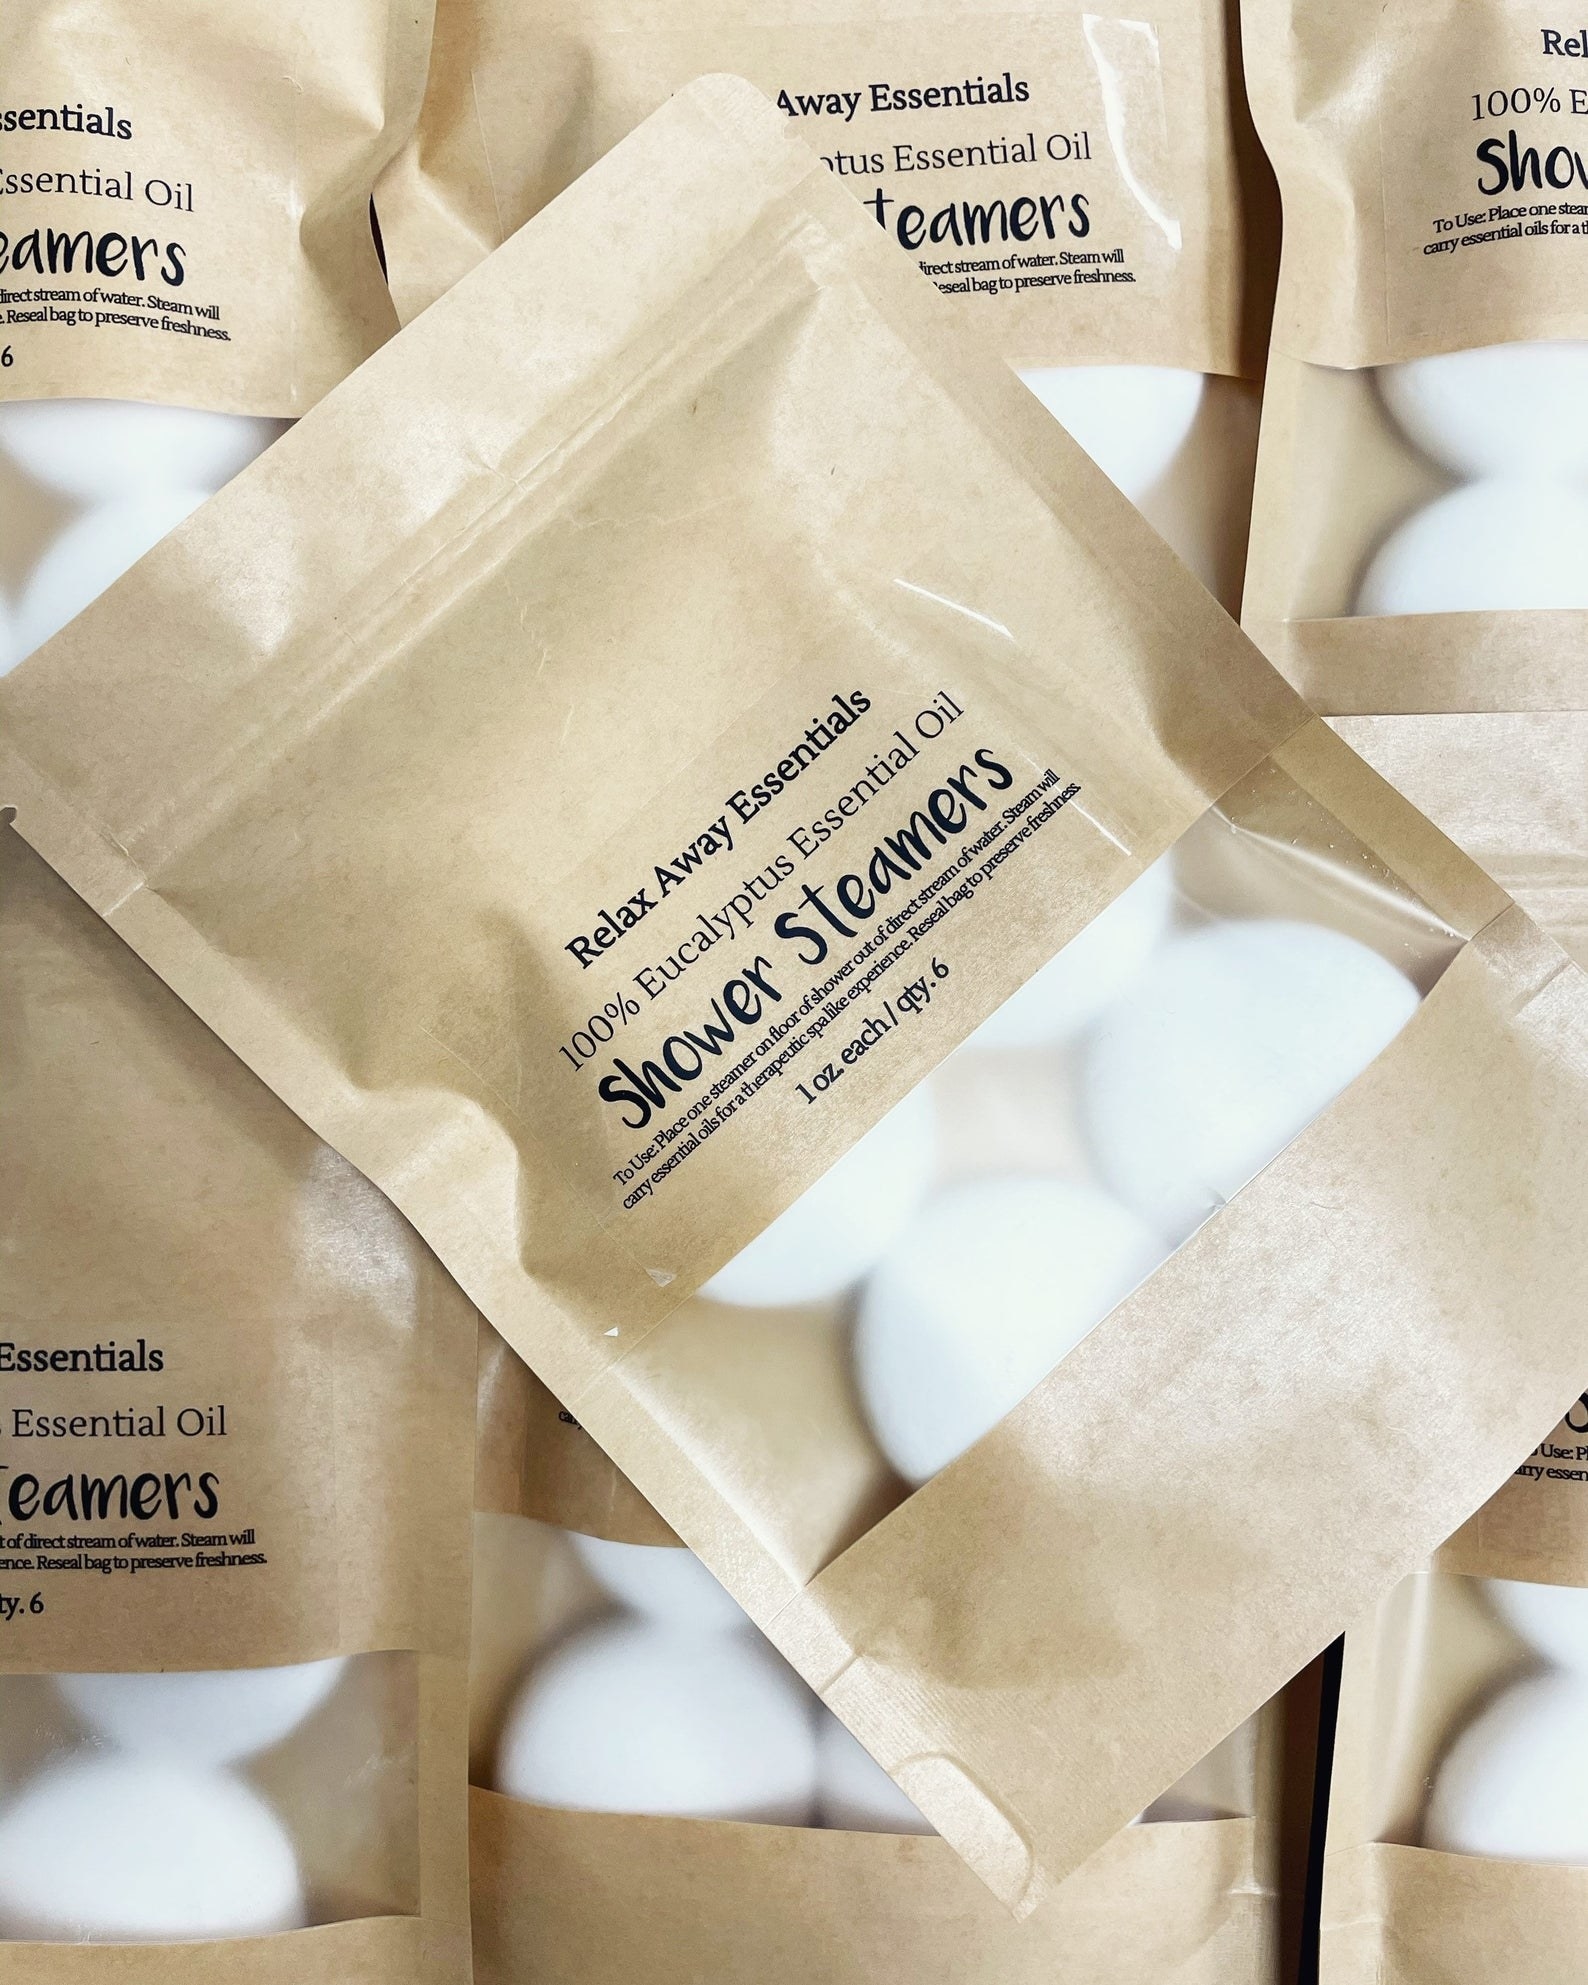 bags of shower steamers